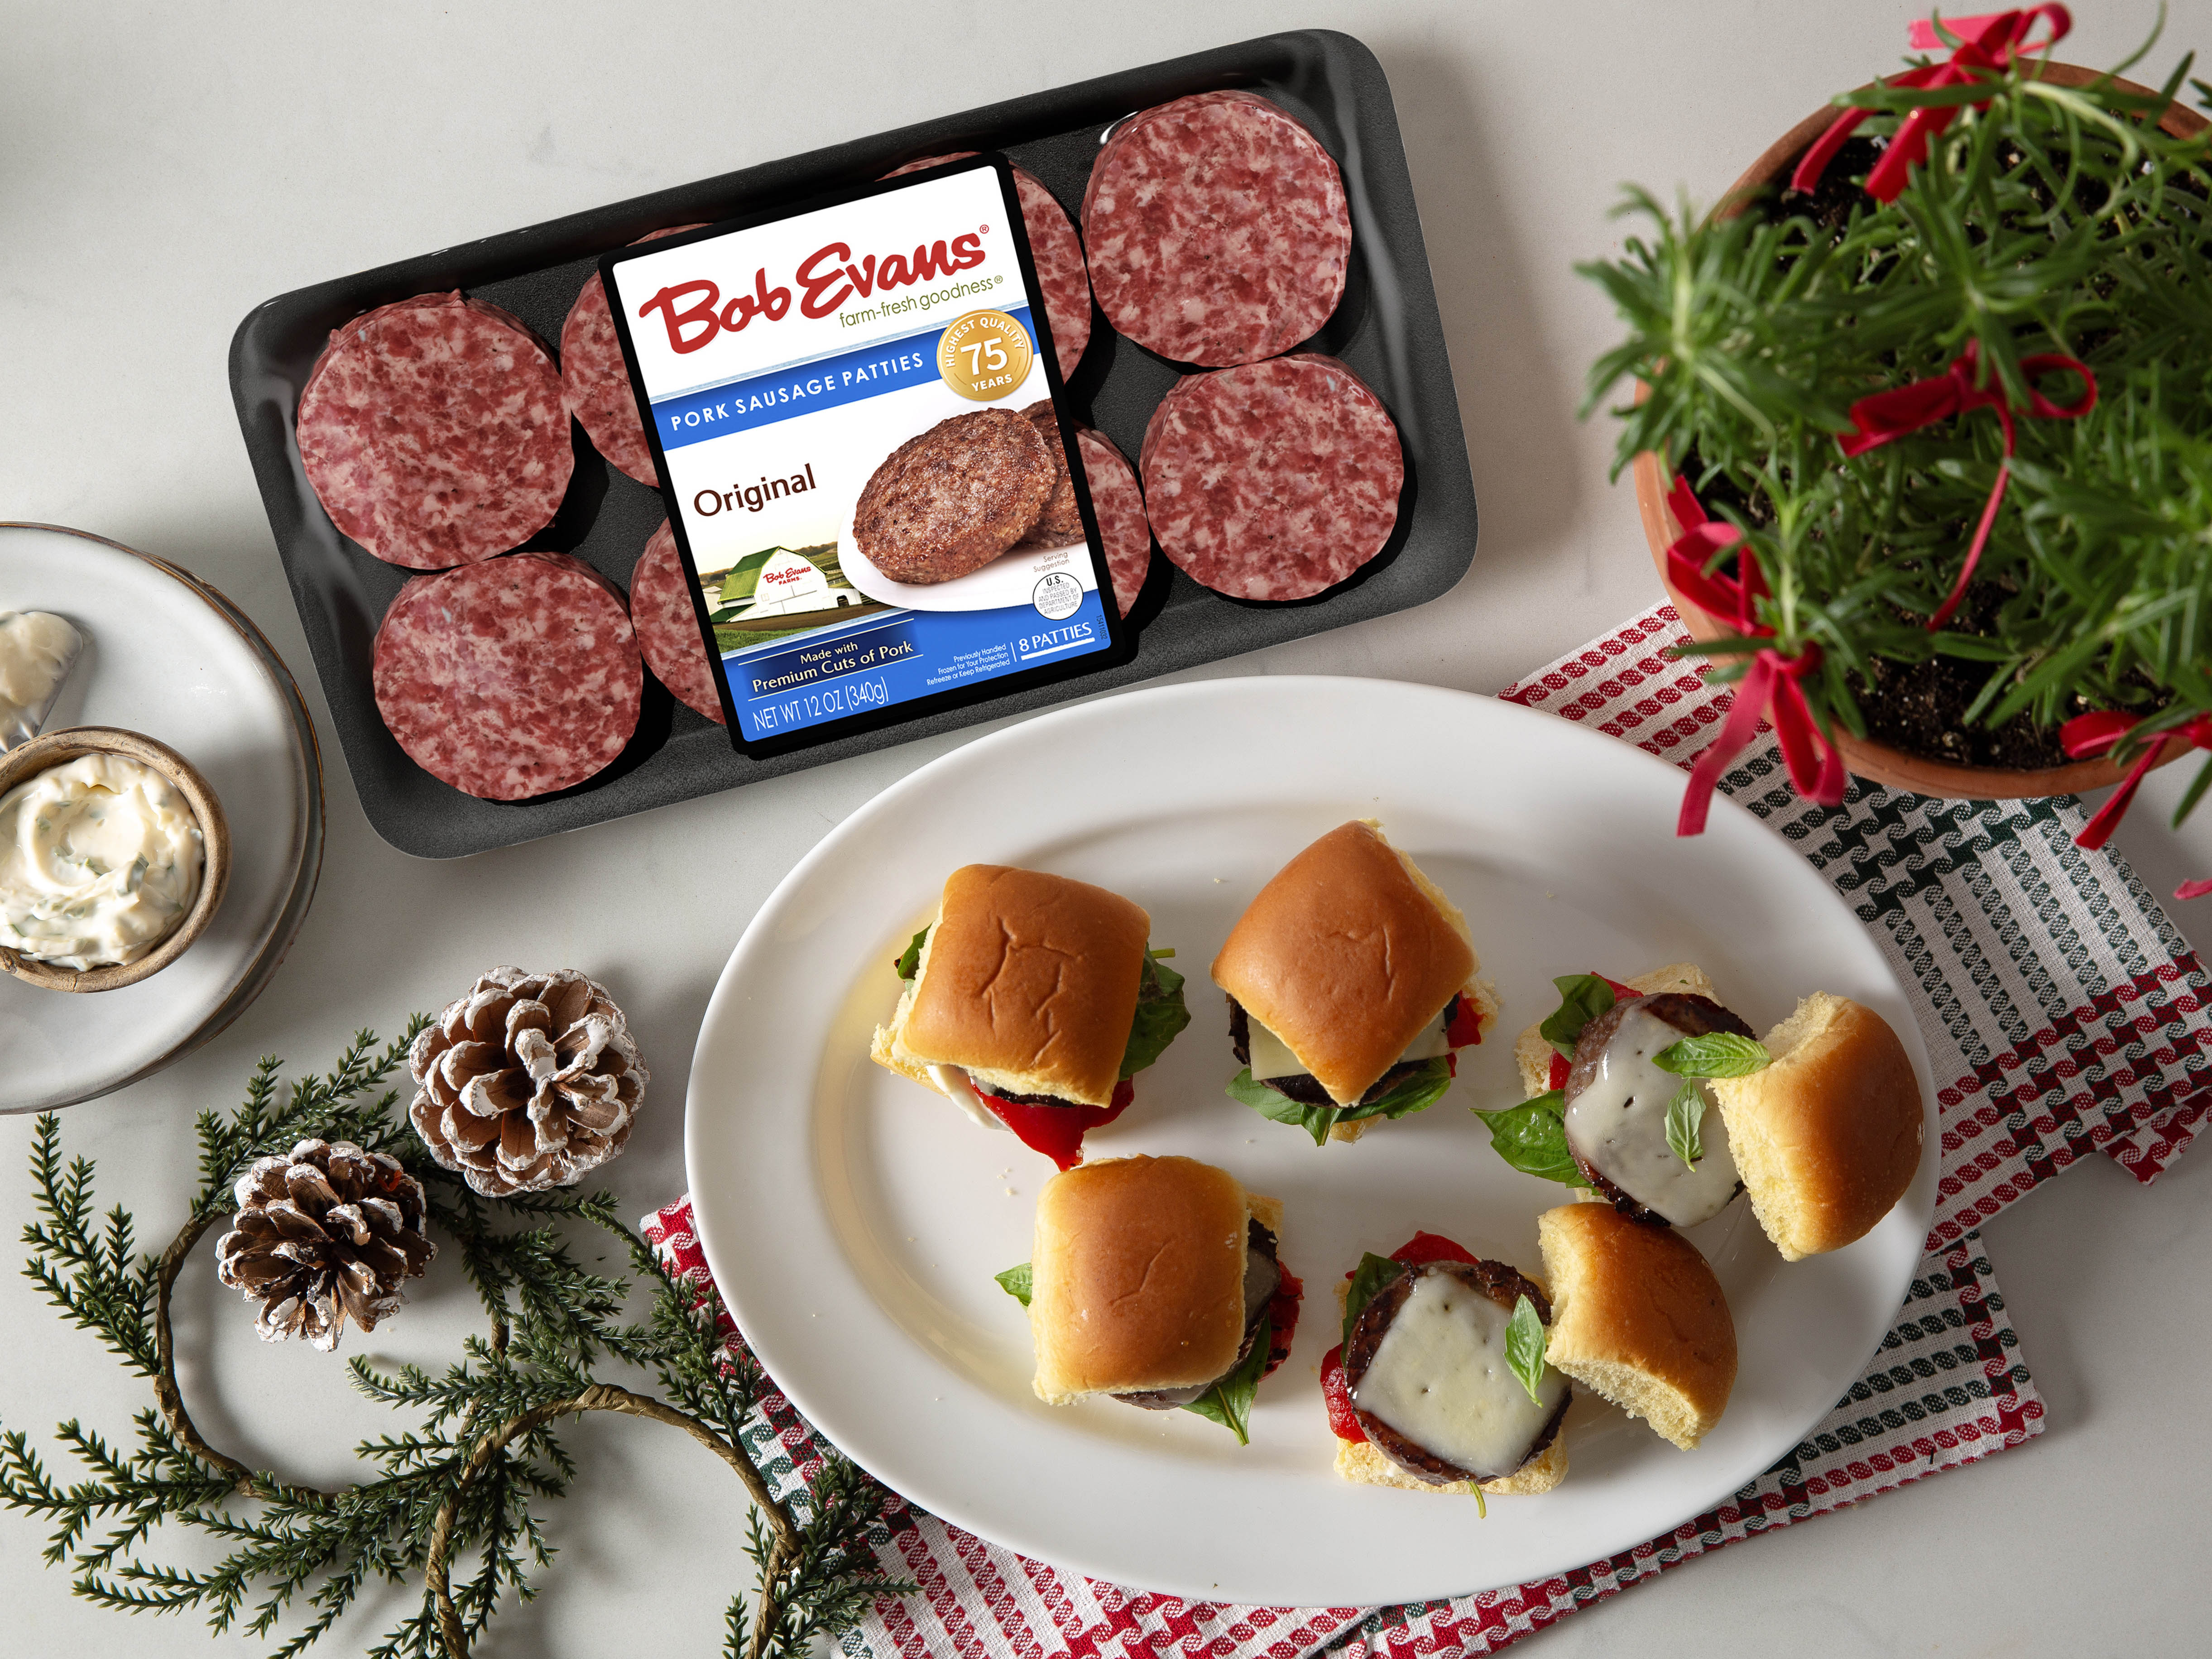 a platter of Italian sliders next to a package of Bob Evans Pork Sausage Patties